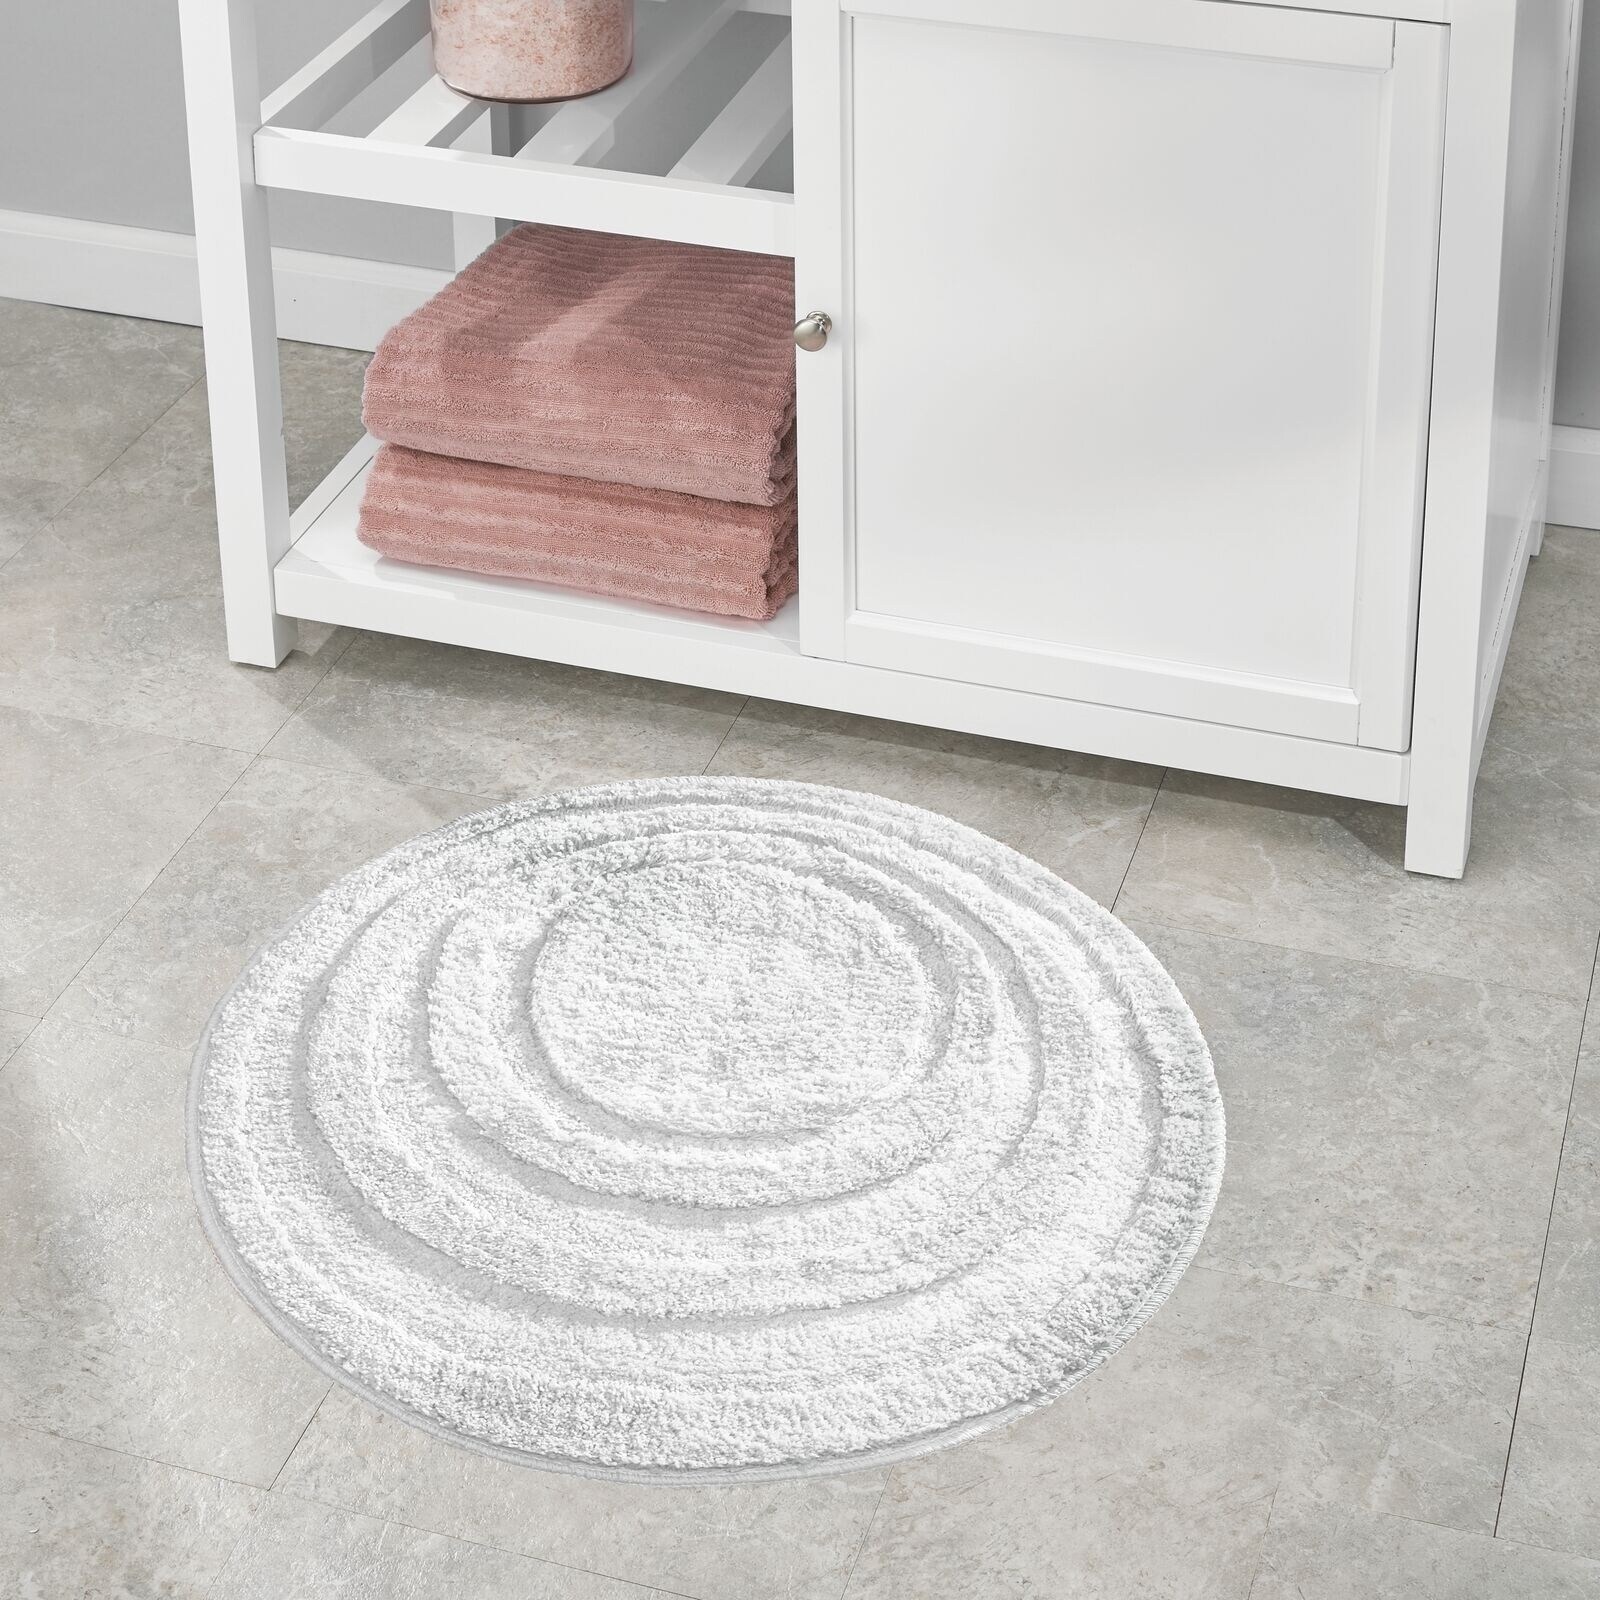 https://ak1.ostkcdn.com/images/products/is/images/direct/96802a4aac5daa52dad120ffdb0f5b23237d7a1f/mDesign-Round-Microfiber-Bathroom-Spa-Mat%2C-Accent-Rug%2C-Machine-Washable.jpg